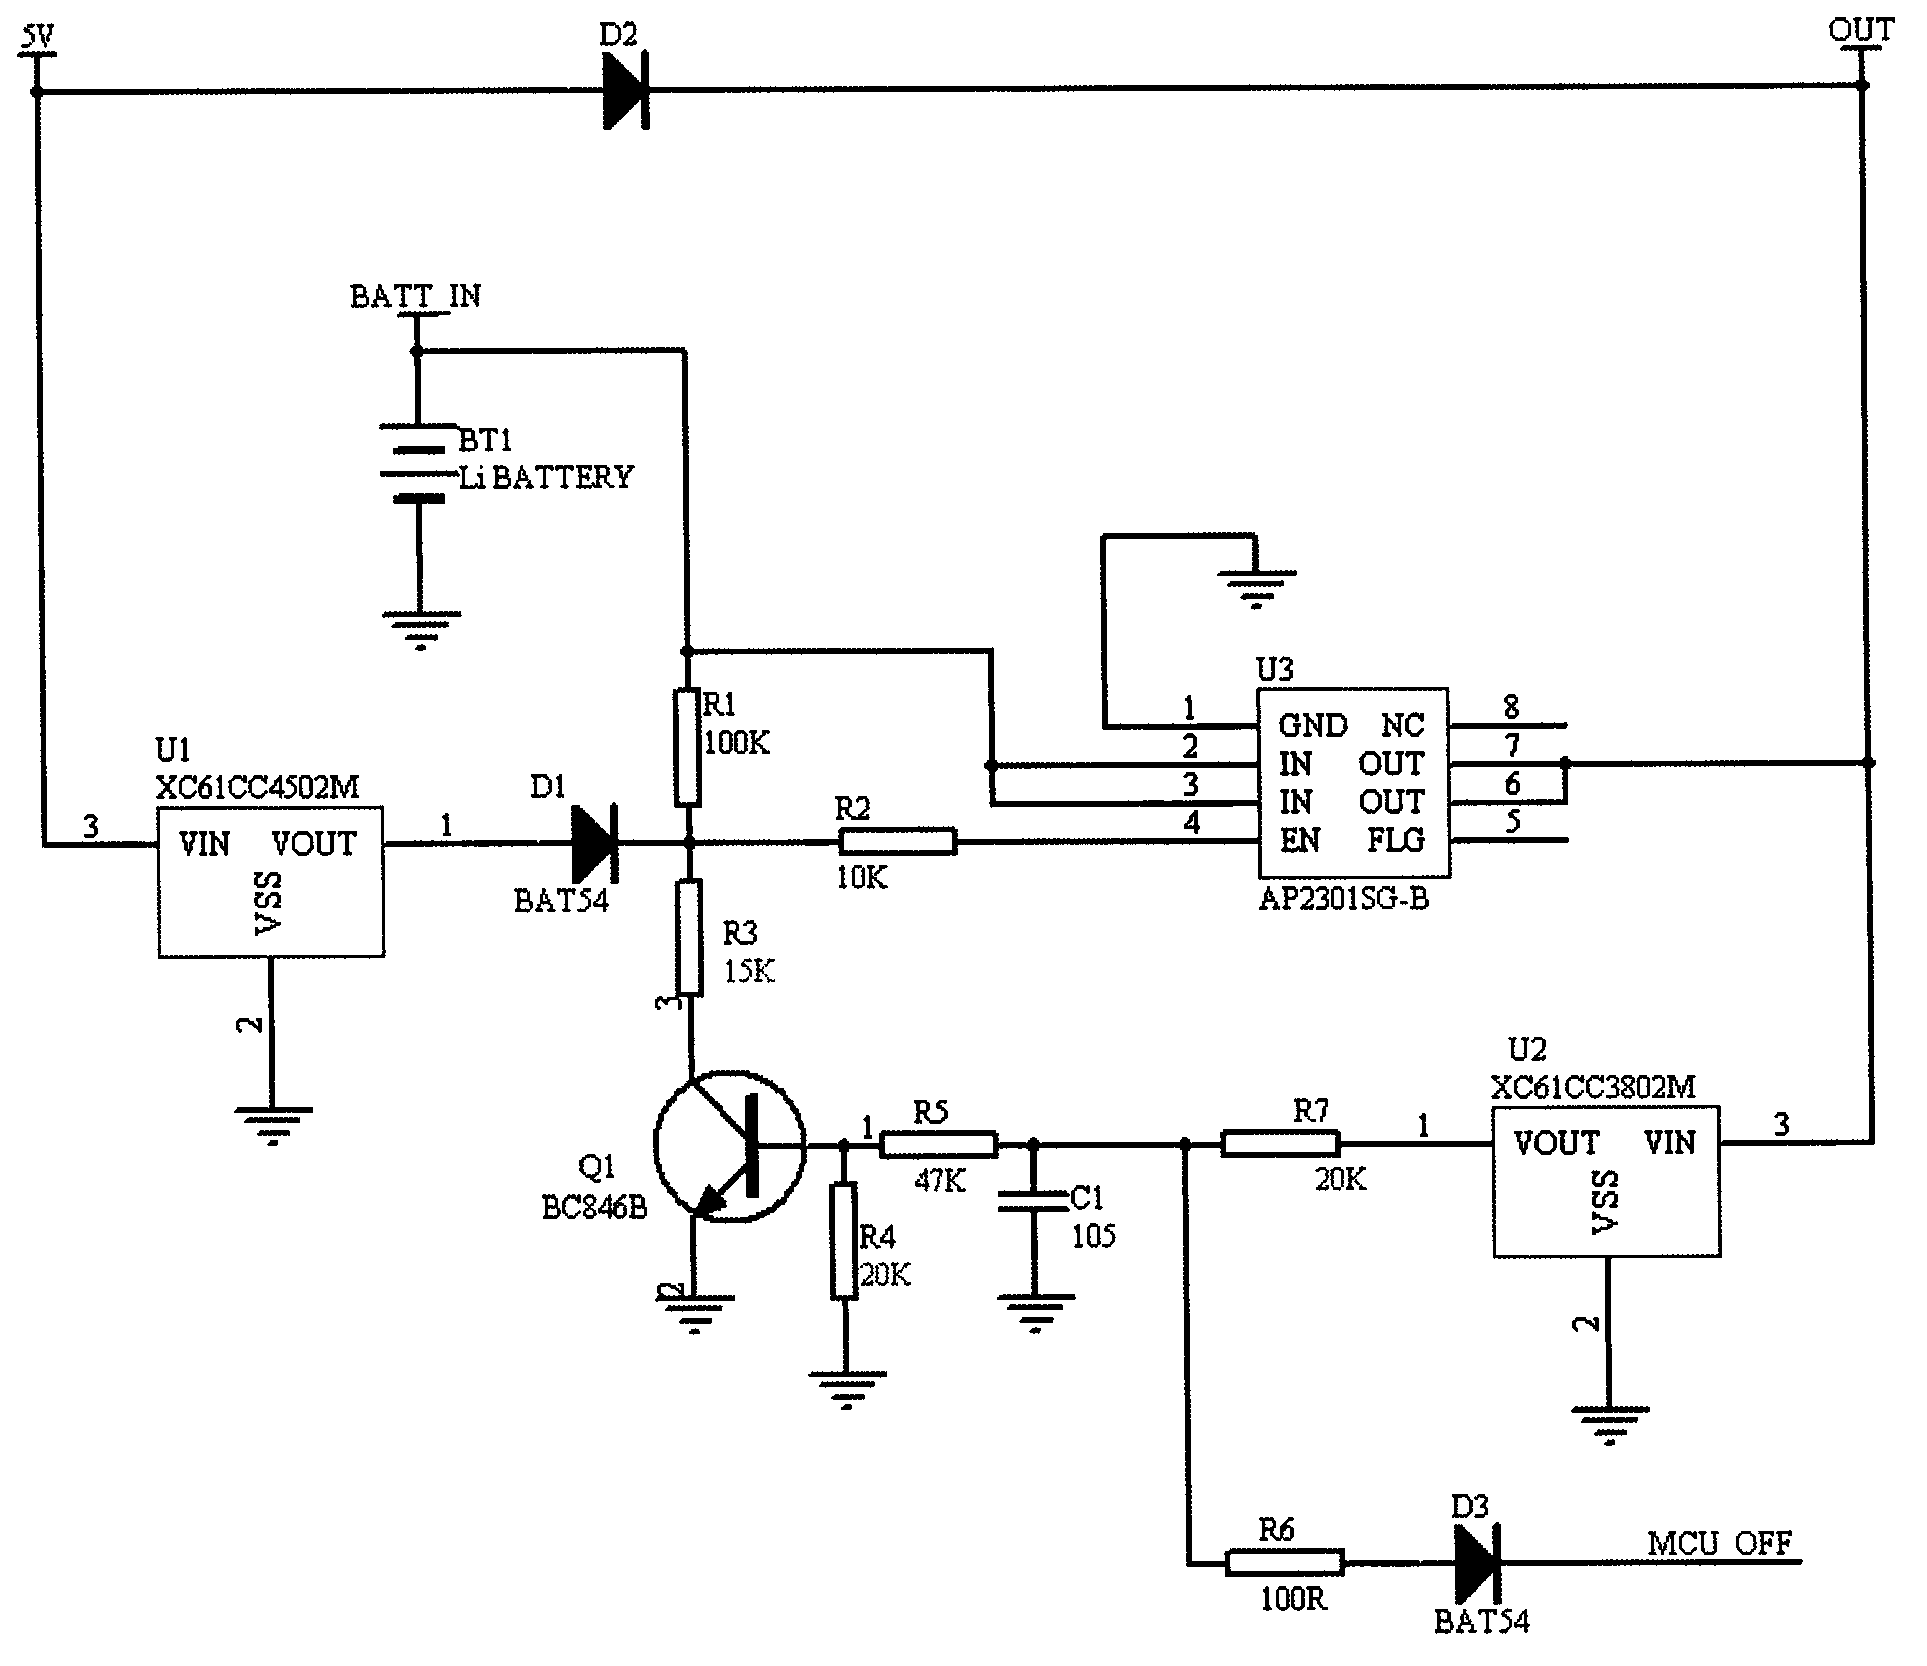 Switching and protection circuit for standby battery of vehicle-mounted GPS (global positioning system) terminal